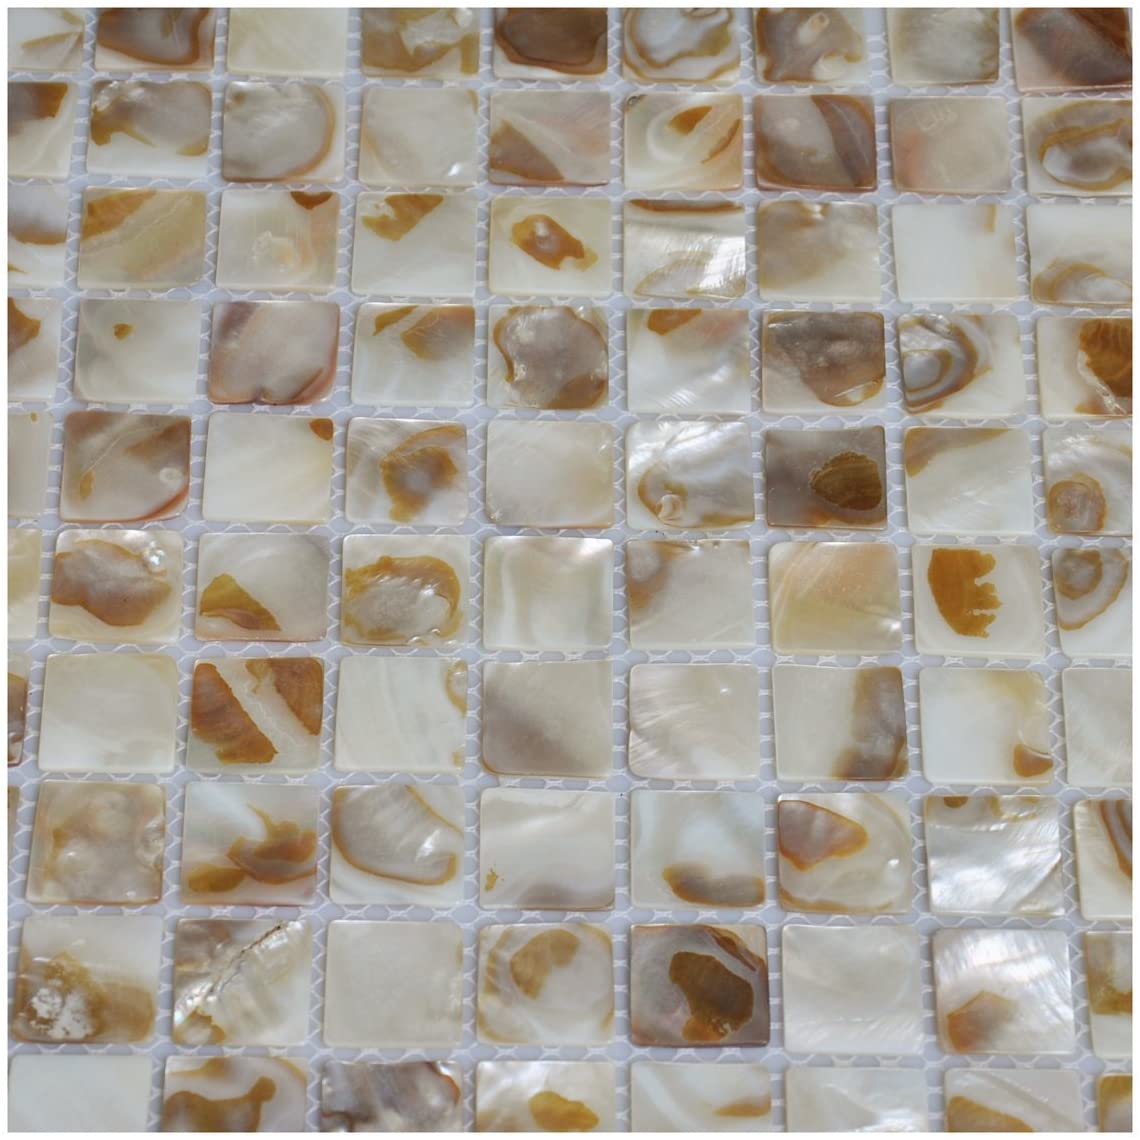 Mother of Pearl Tile Natural Varied Sea Shell Square Wall Tile (5 Sheets) for Kitchen Backsplash, Bathroom Shower, Accent Wall